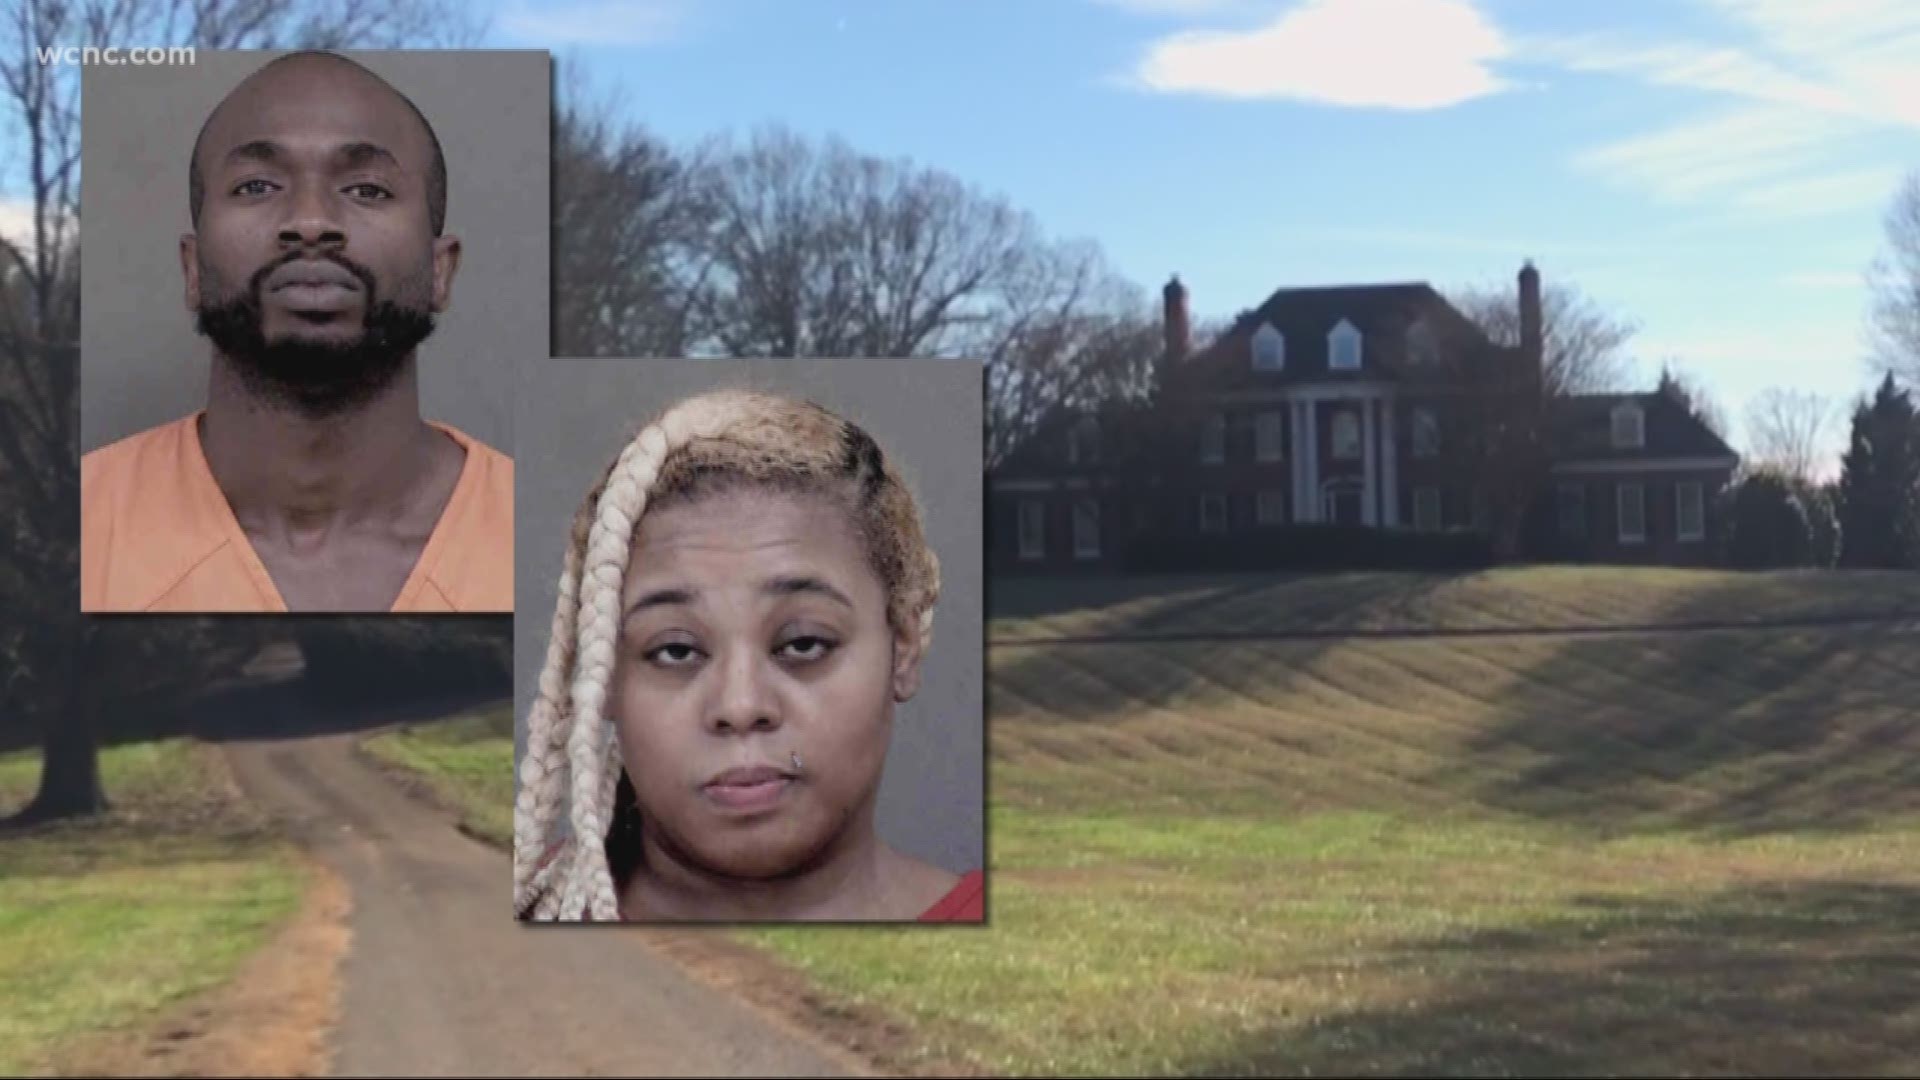 The couple was charged with illegally moving into a multi-million dollar home belonging to the family of Davidson Mayor Rusty Knox. The accused squatters are now facing felonies.